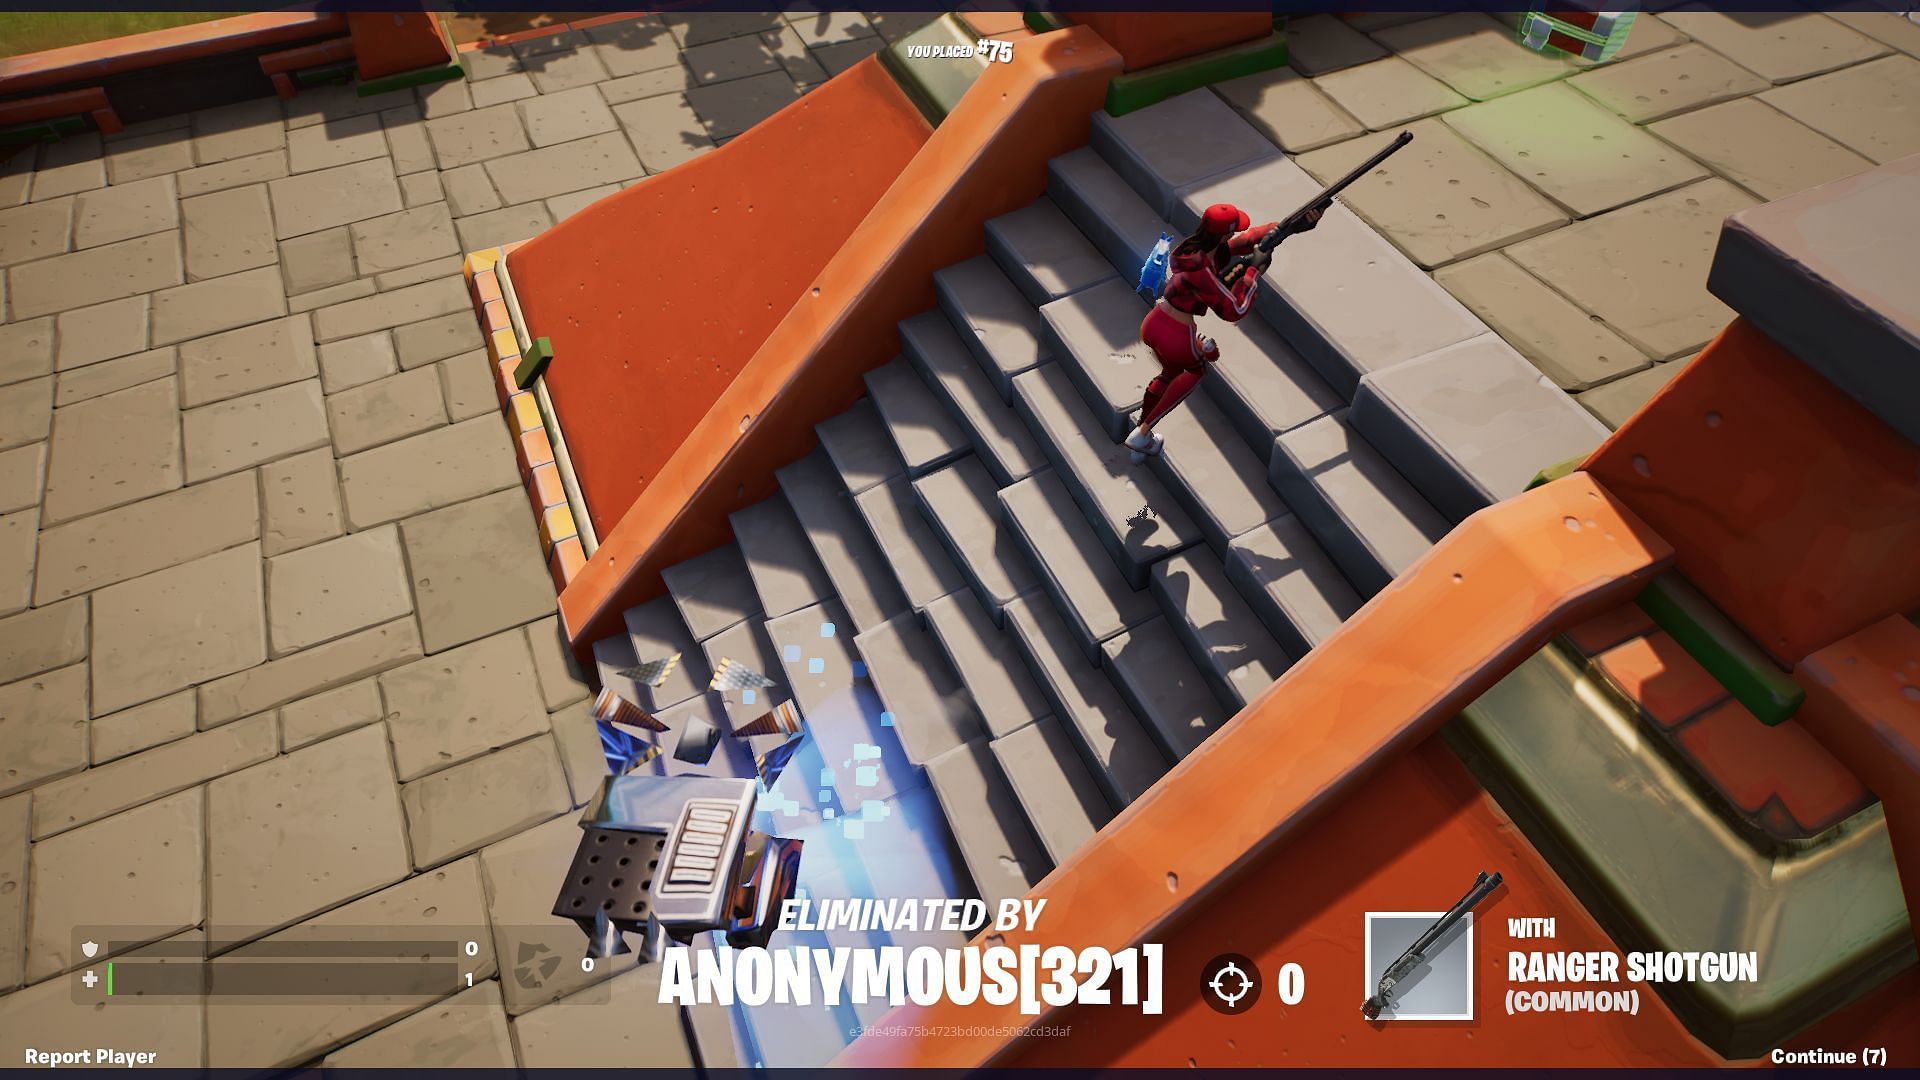 Mark the spot where an opponent is eliminated to make it easier to pick up the gold bars (image via Epic Games/Fortnite)